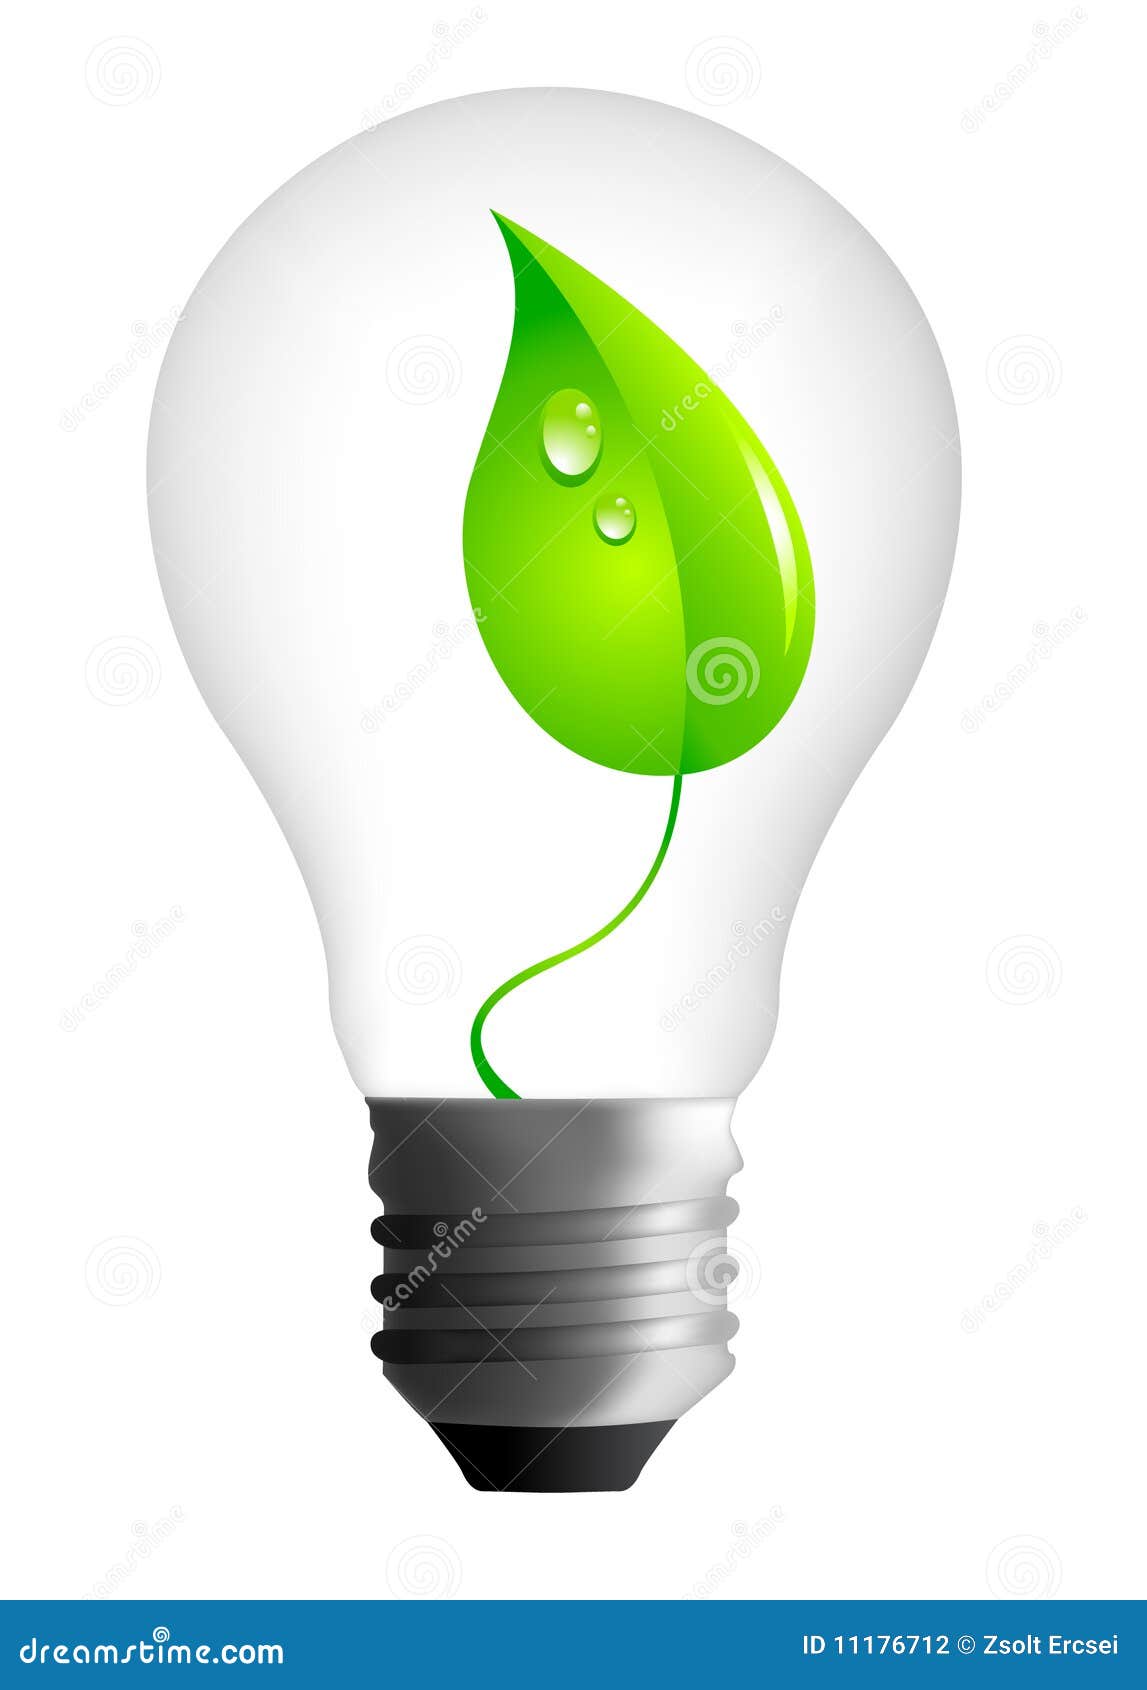 Photorealistic Light a Leaf Stock Vector - Illustration of brainstorming, conceptual: 11176712